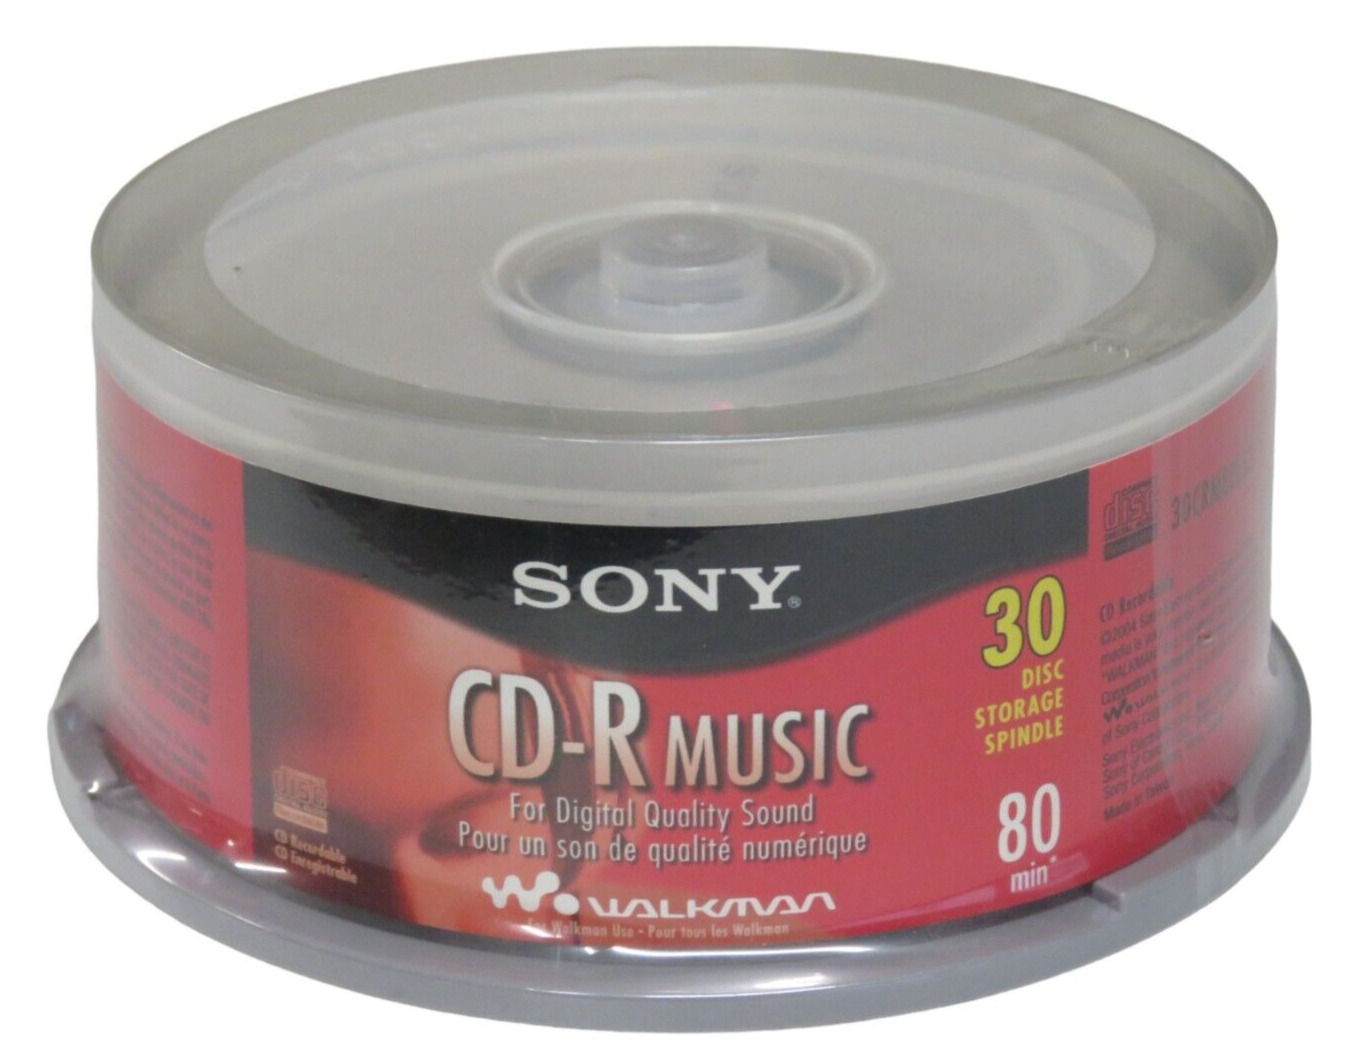 Sony CD-R Music 30 Pack For WALKMAN 80 Min Disc Recordable CD New Sealed